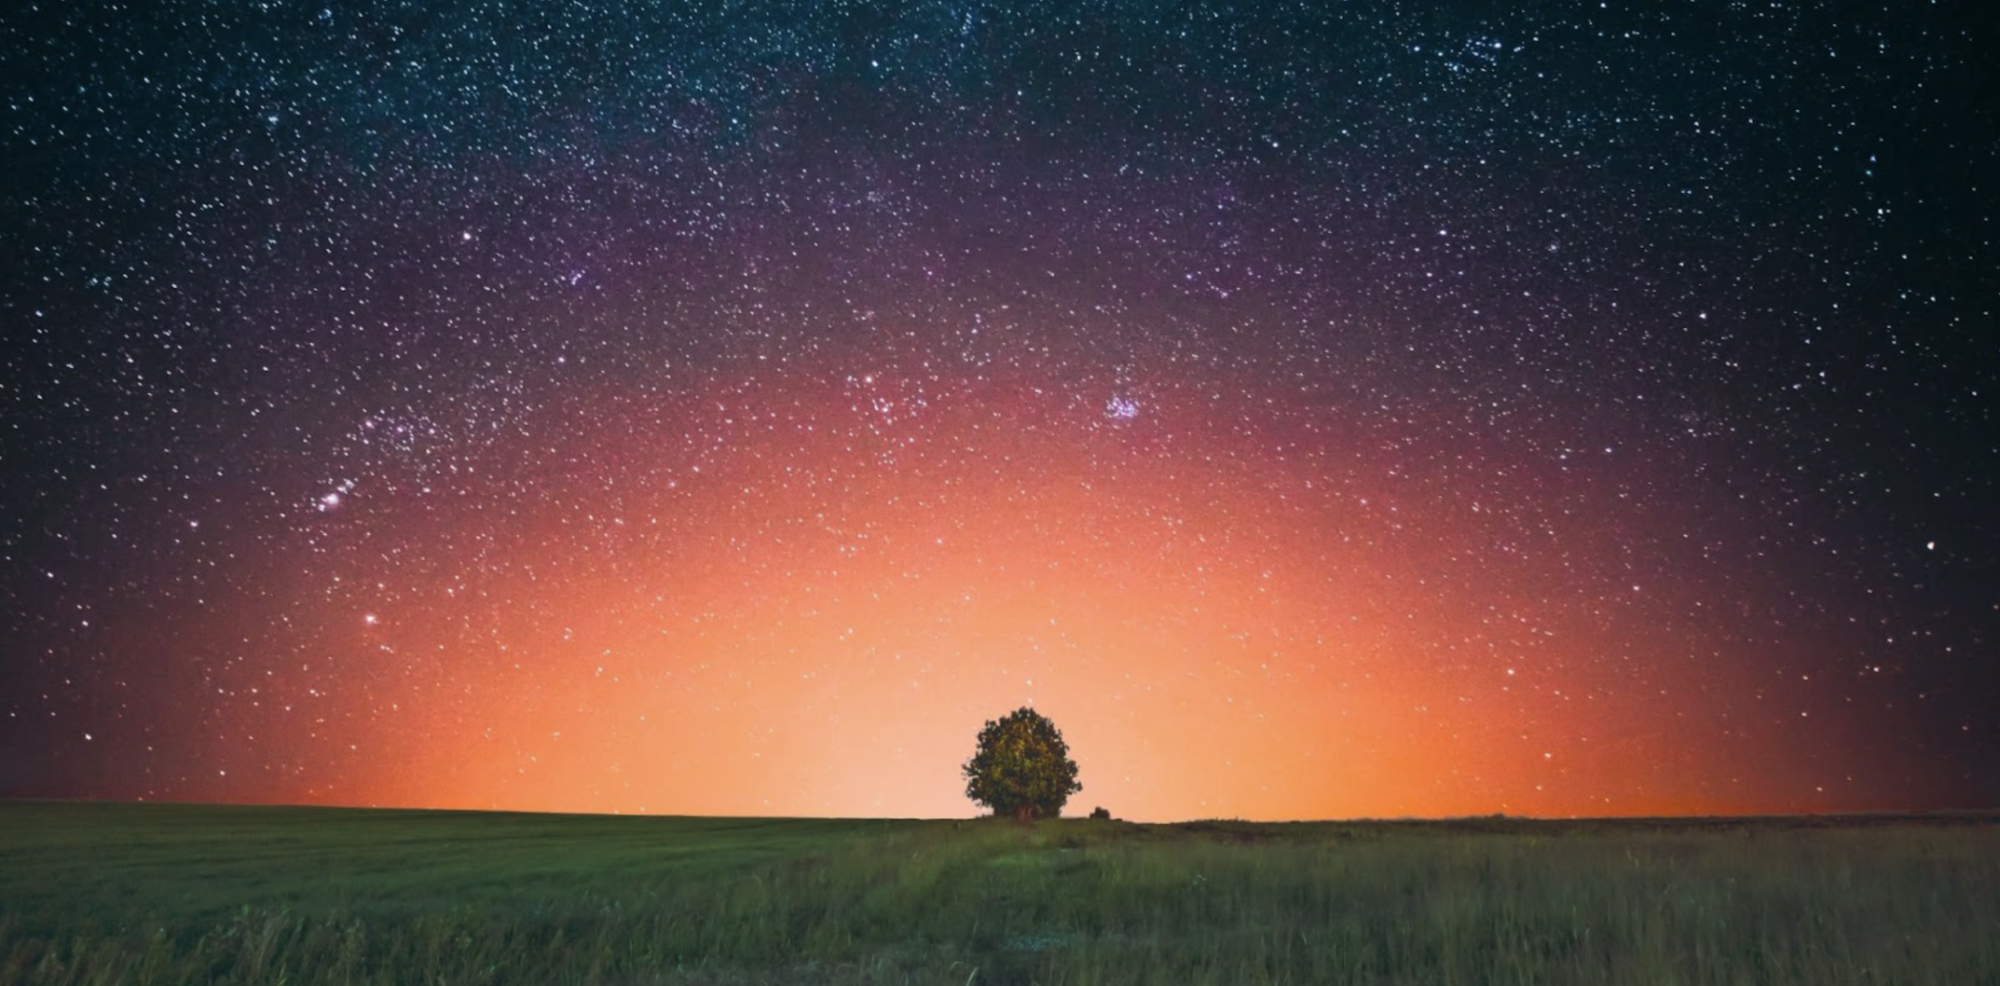 image of tree at the center of a field with sunset and stars out